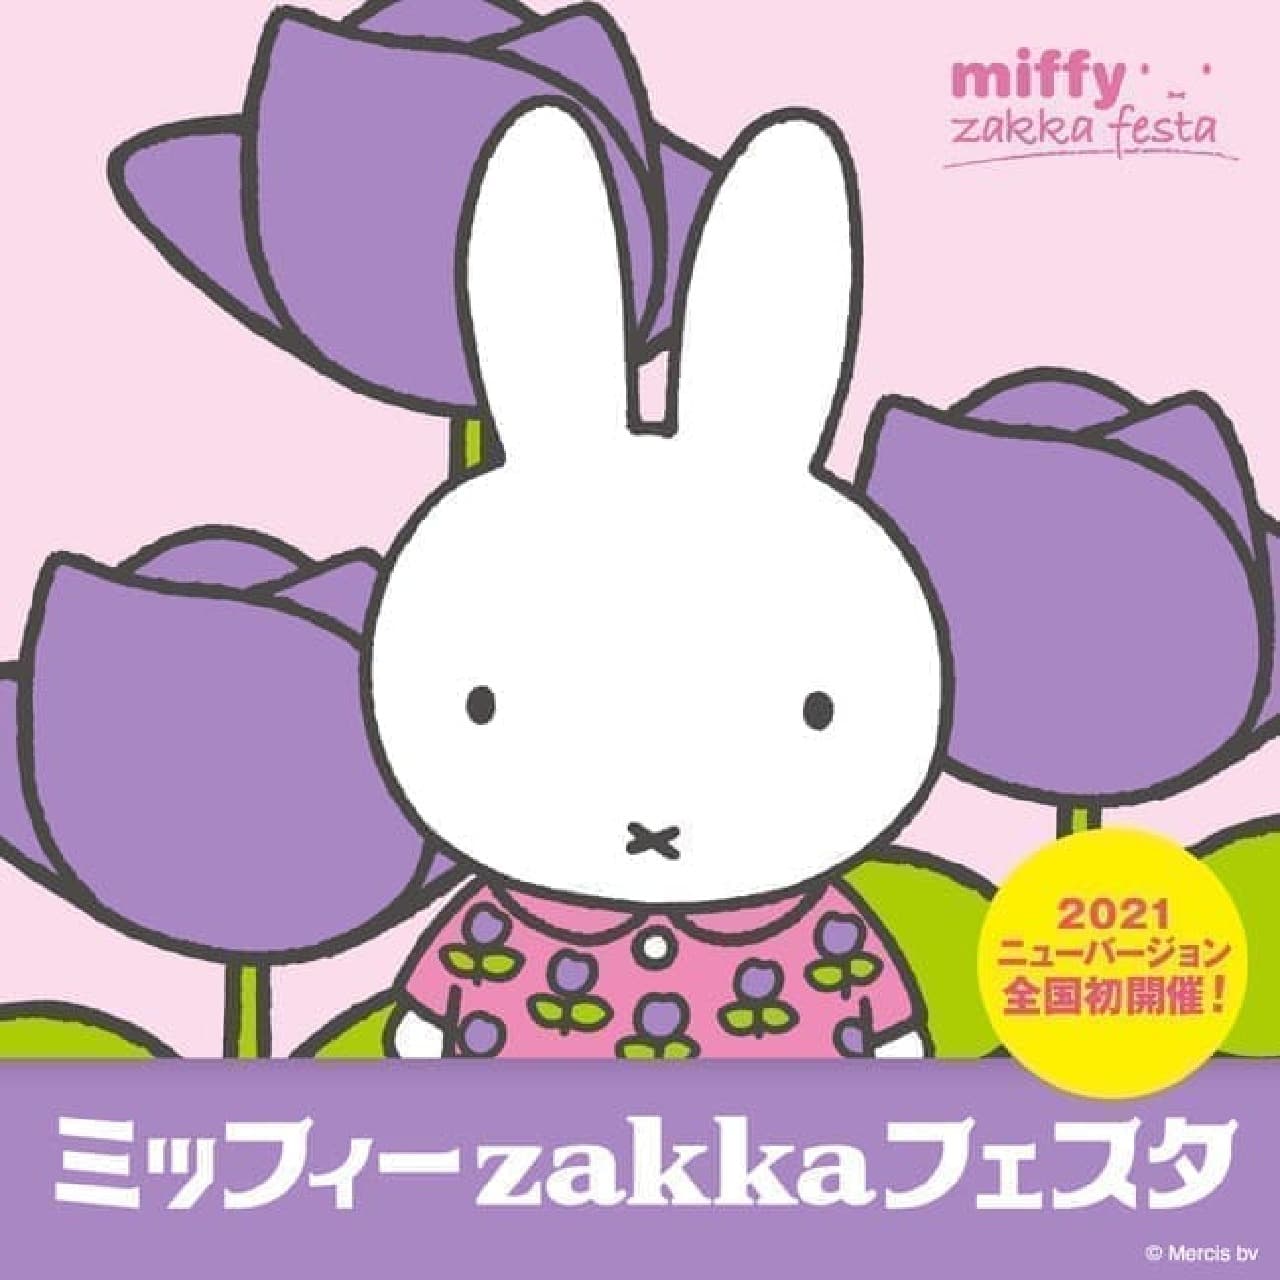 "Miffy zakka Festa" held at Seibu Ikebukuro --Limited goods and photo spots that first appeared in Japan